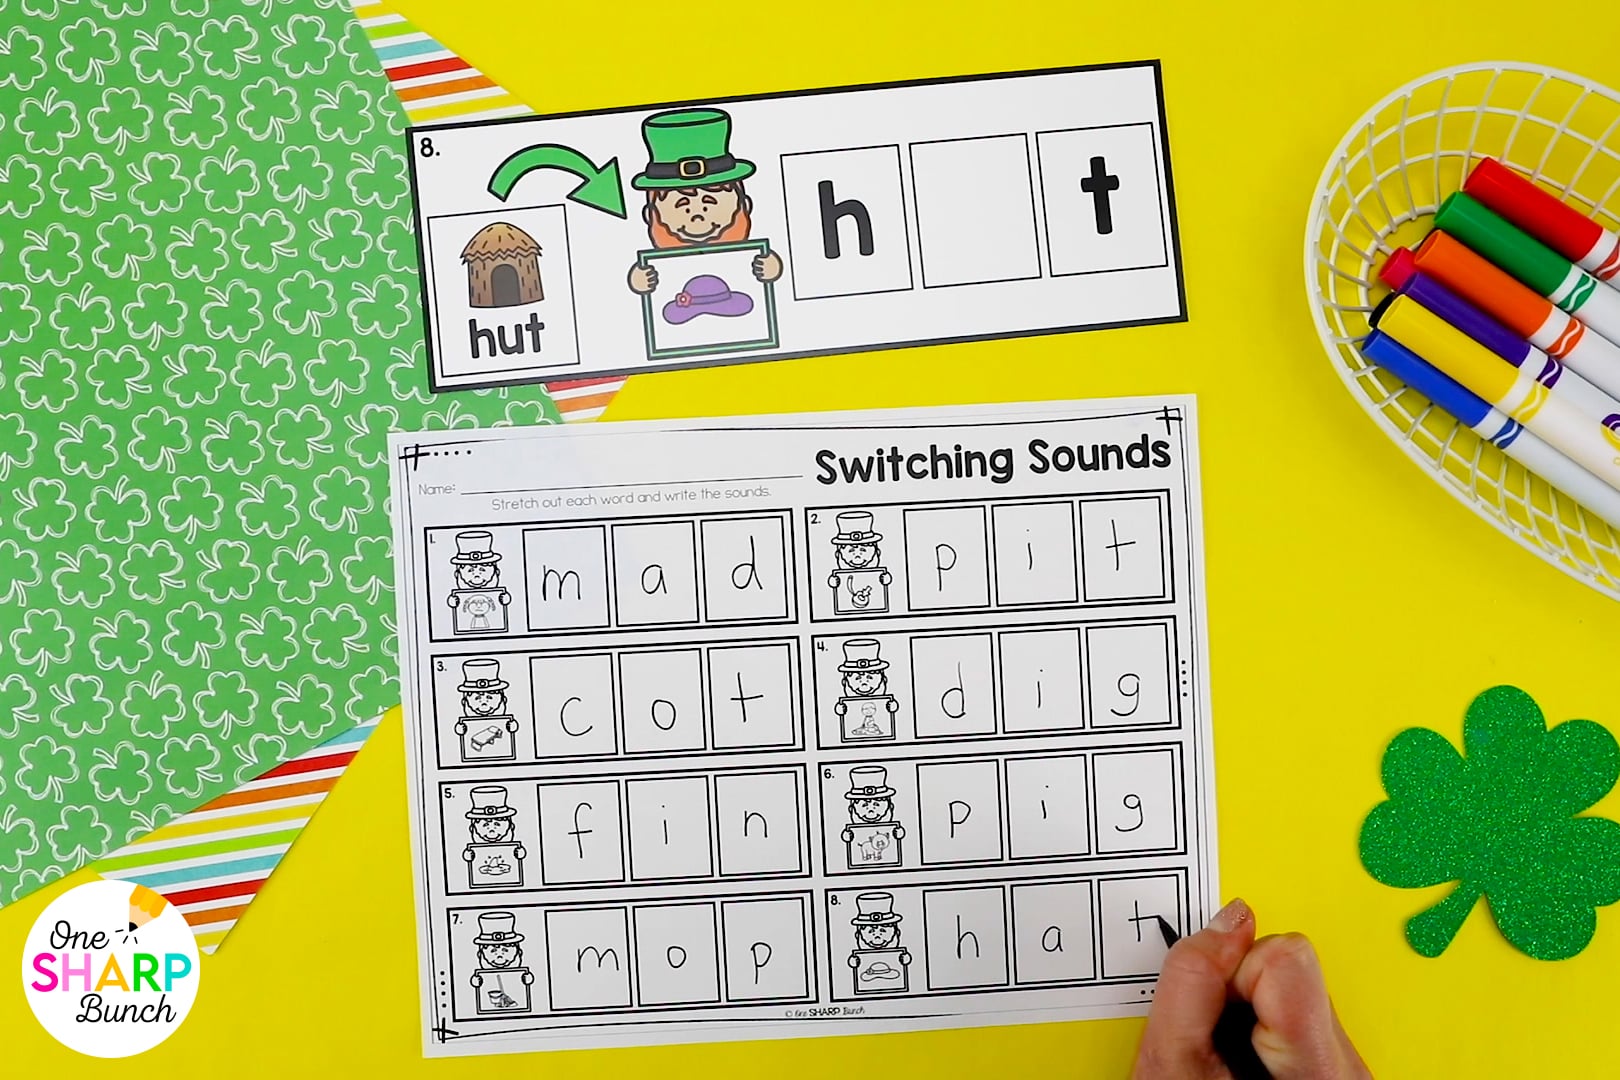 Celebrate St. Patrick's Day as your kindergarten and first grade students review important math and literacy skills with these St. Patrick’s Day activities and centers for math and literacy. These St. Patrick's Day centers allow students to practice beginning blends, silent e words, high frequency words, 3D shapes, teen numbers and more, as they work to catch the leprechaun. This St. Patrick's Day escape room is great for your leprechaun traps, St. Patrick's Day party or kindergarten centers!